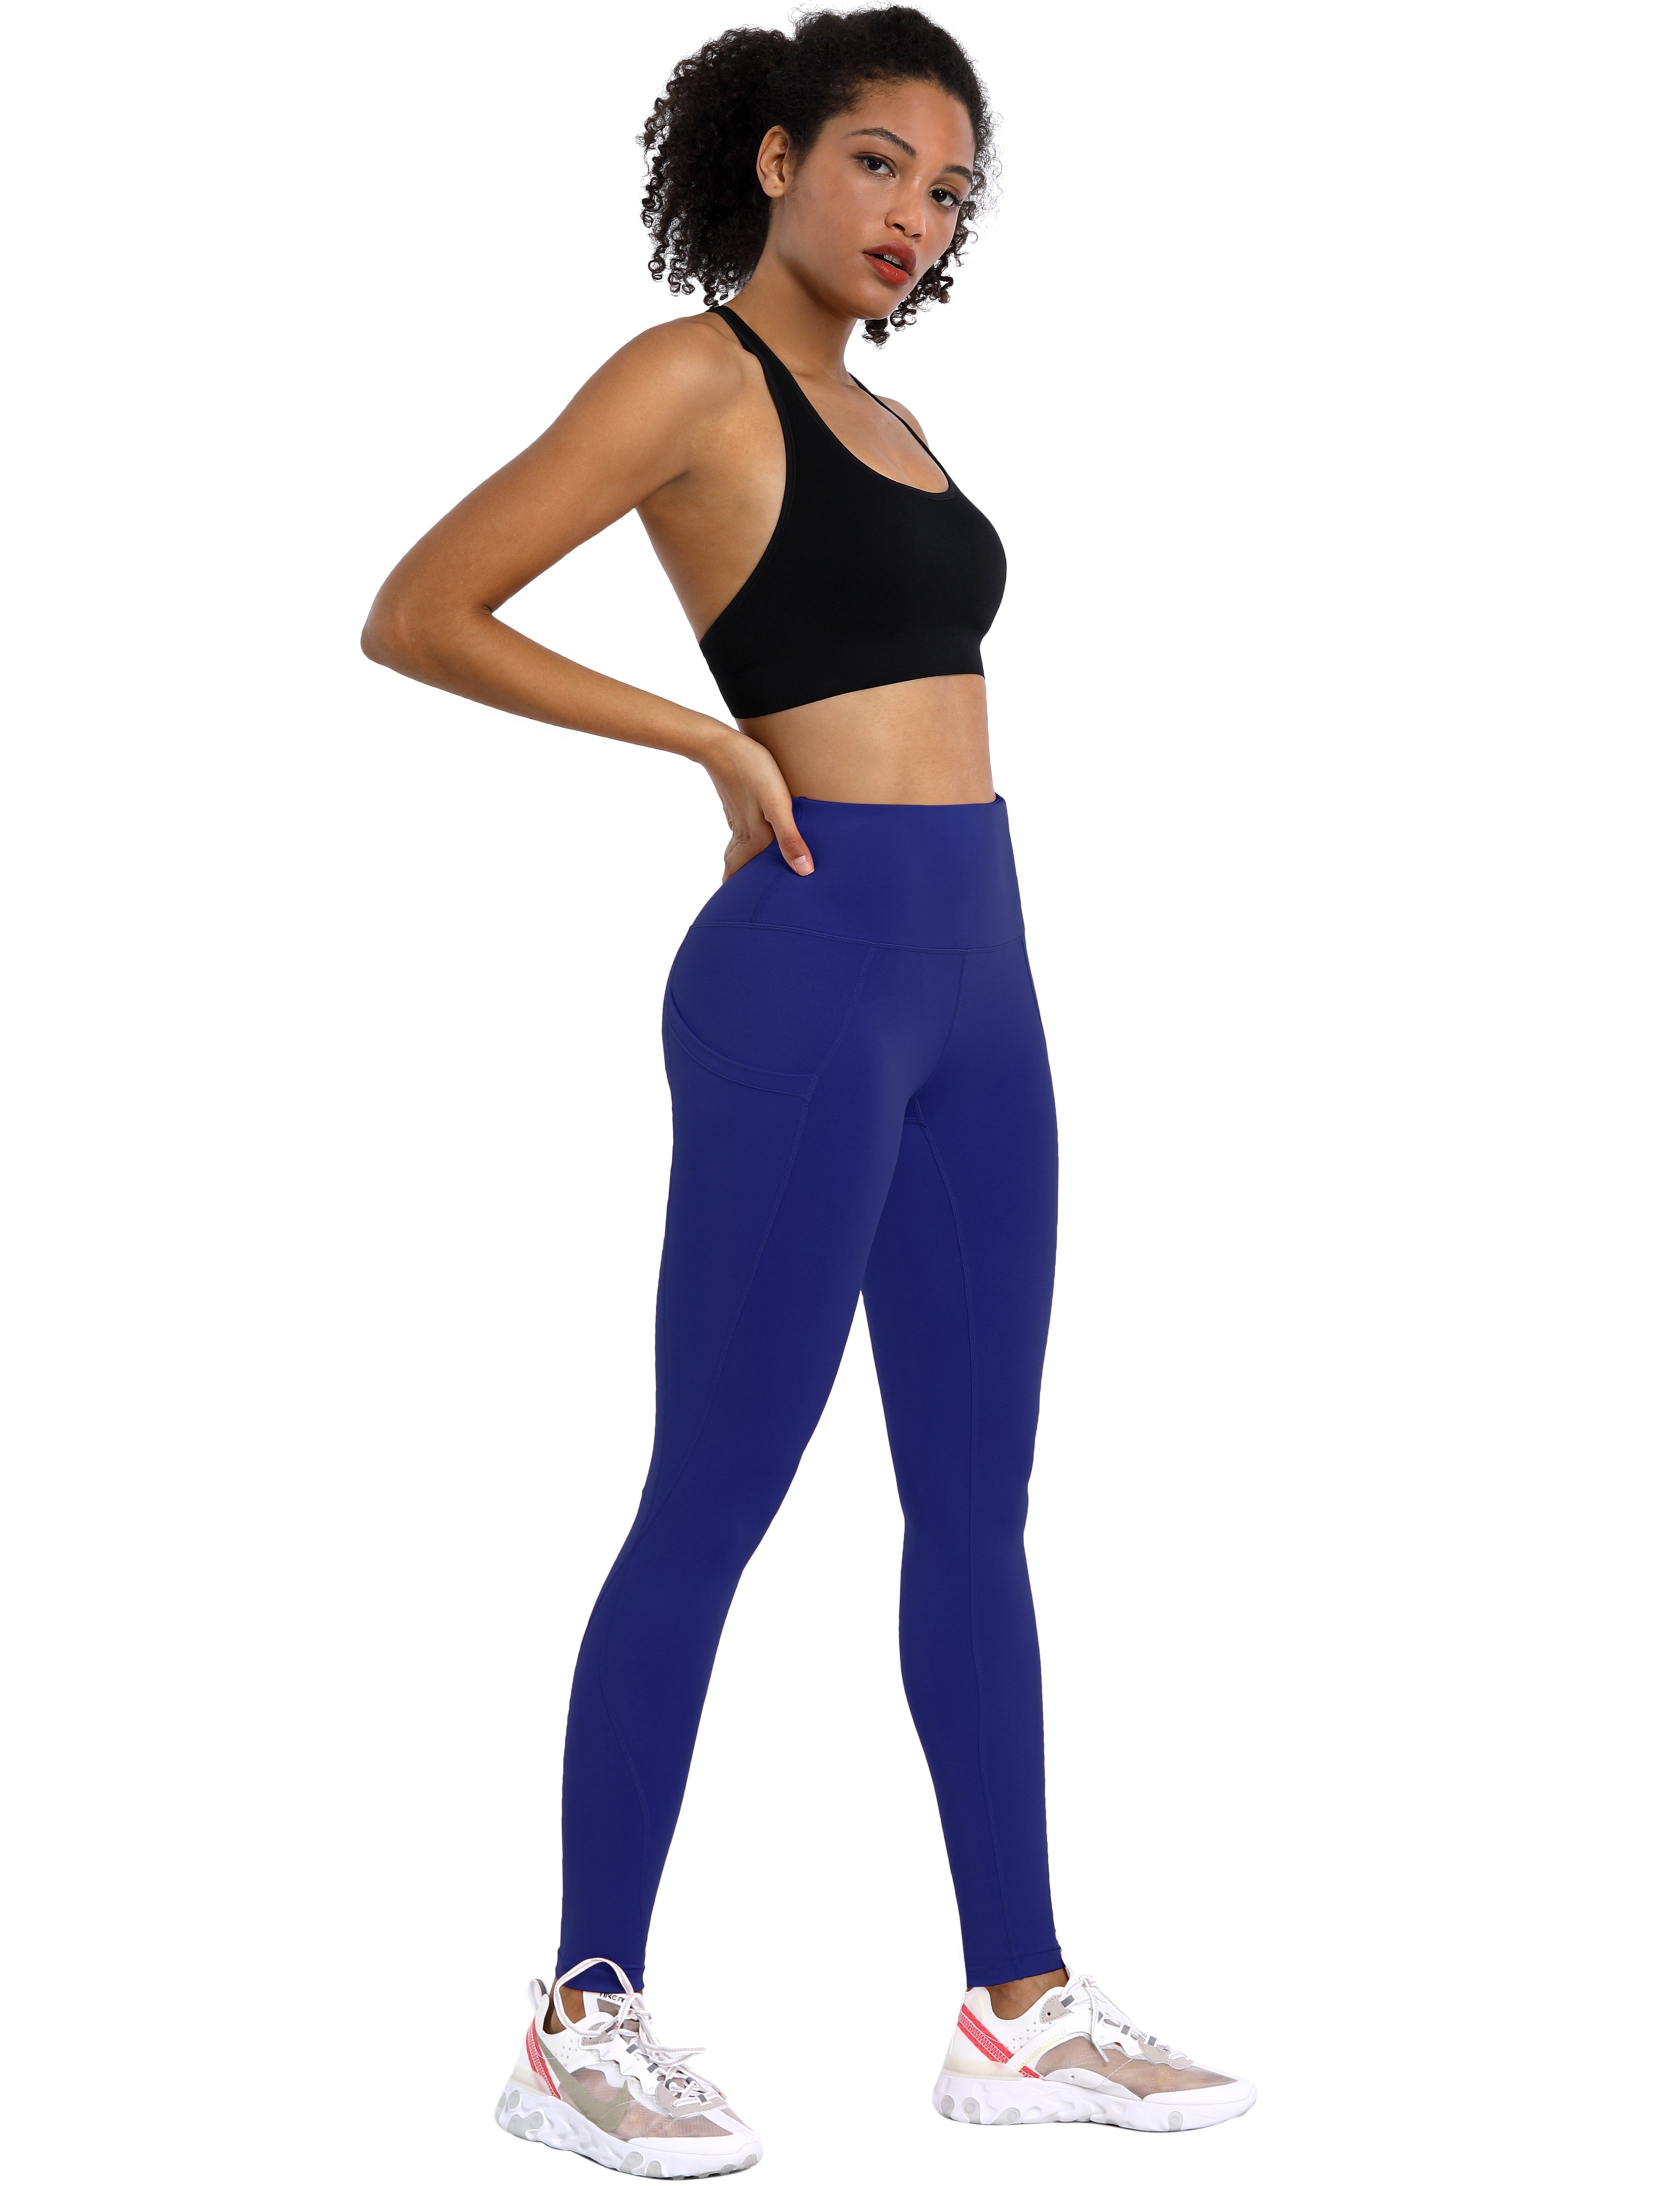 High Waist Side Pockets Golf Pants navy 75% Nylon, 25% Spandex Fabric doesn't attract lint easily 4-way stretch No see-through Moisture-wicking Tummy control Inner pocket